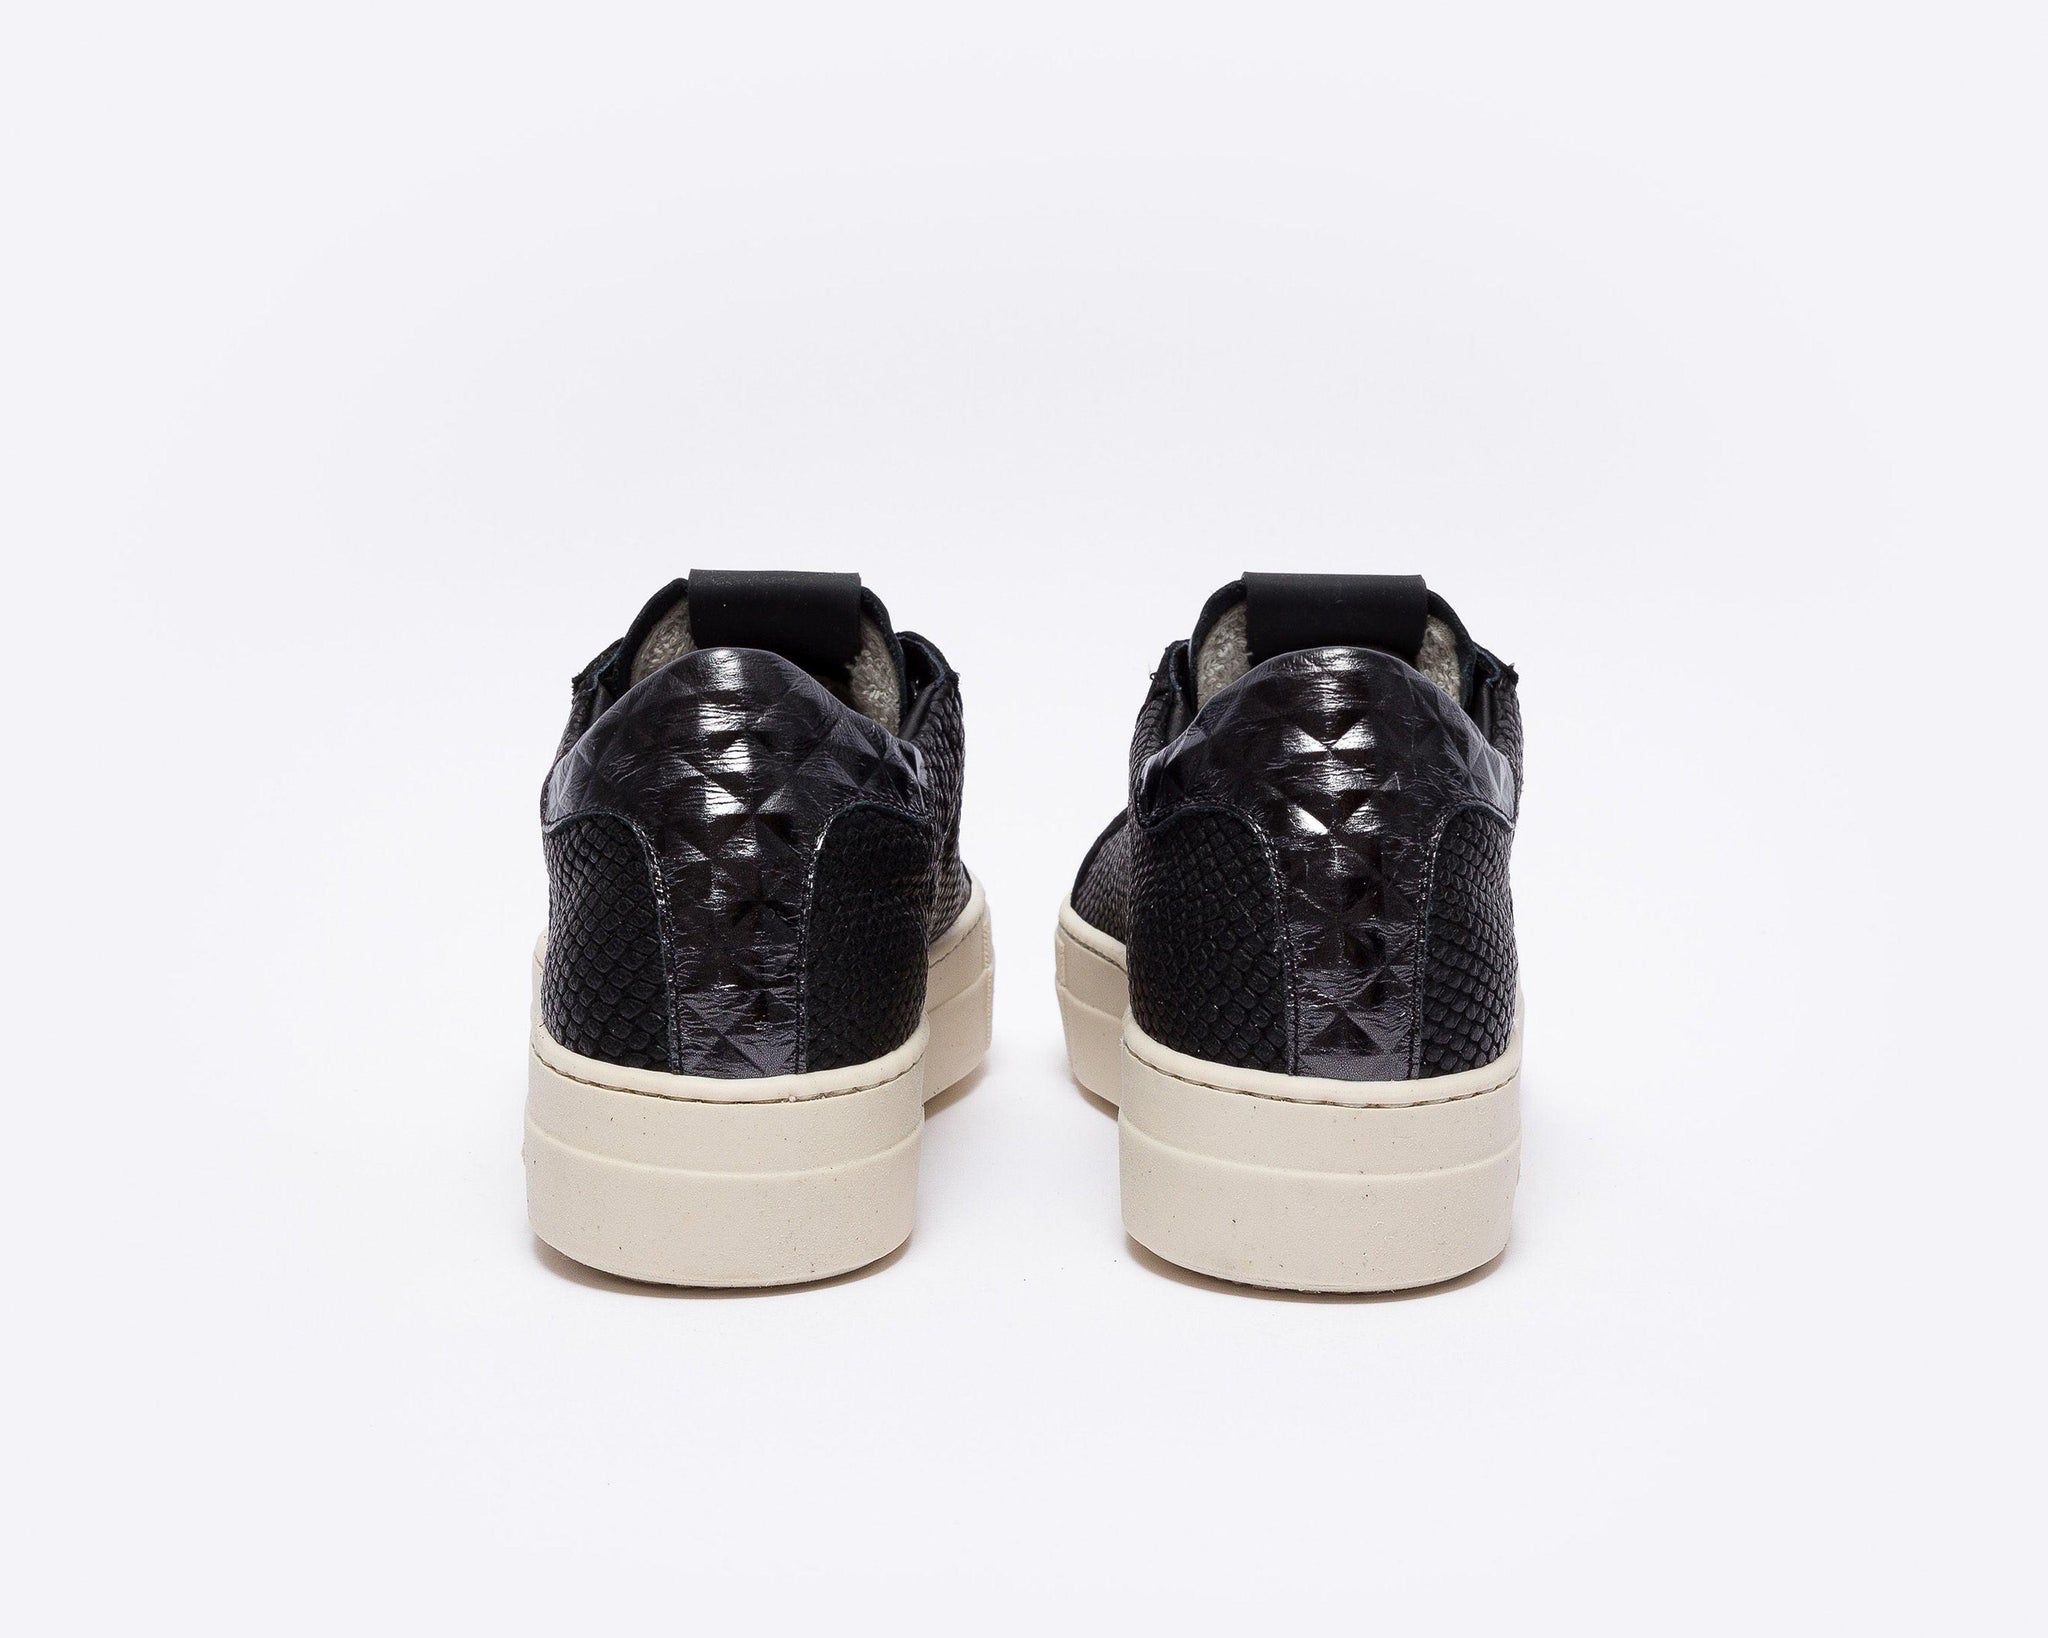 P448 Thea Cheope Black Platform Trainer - MADE THE EDIT